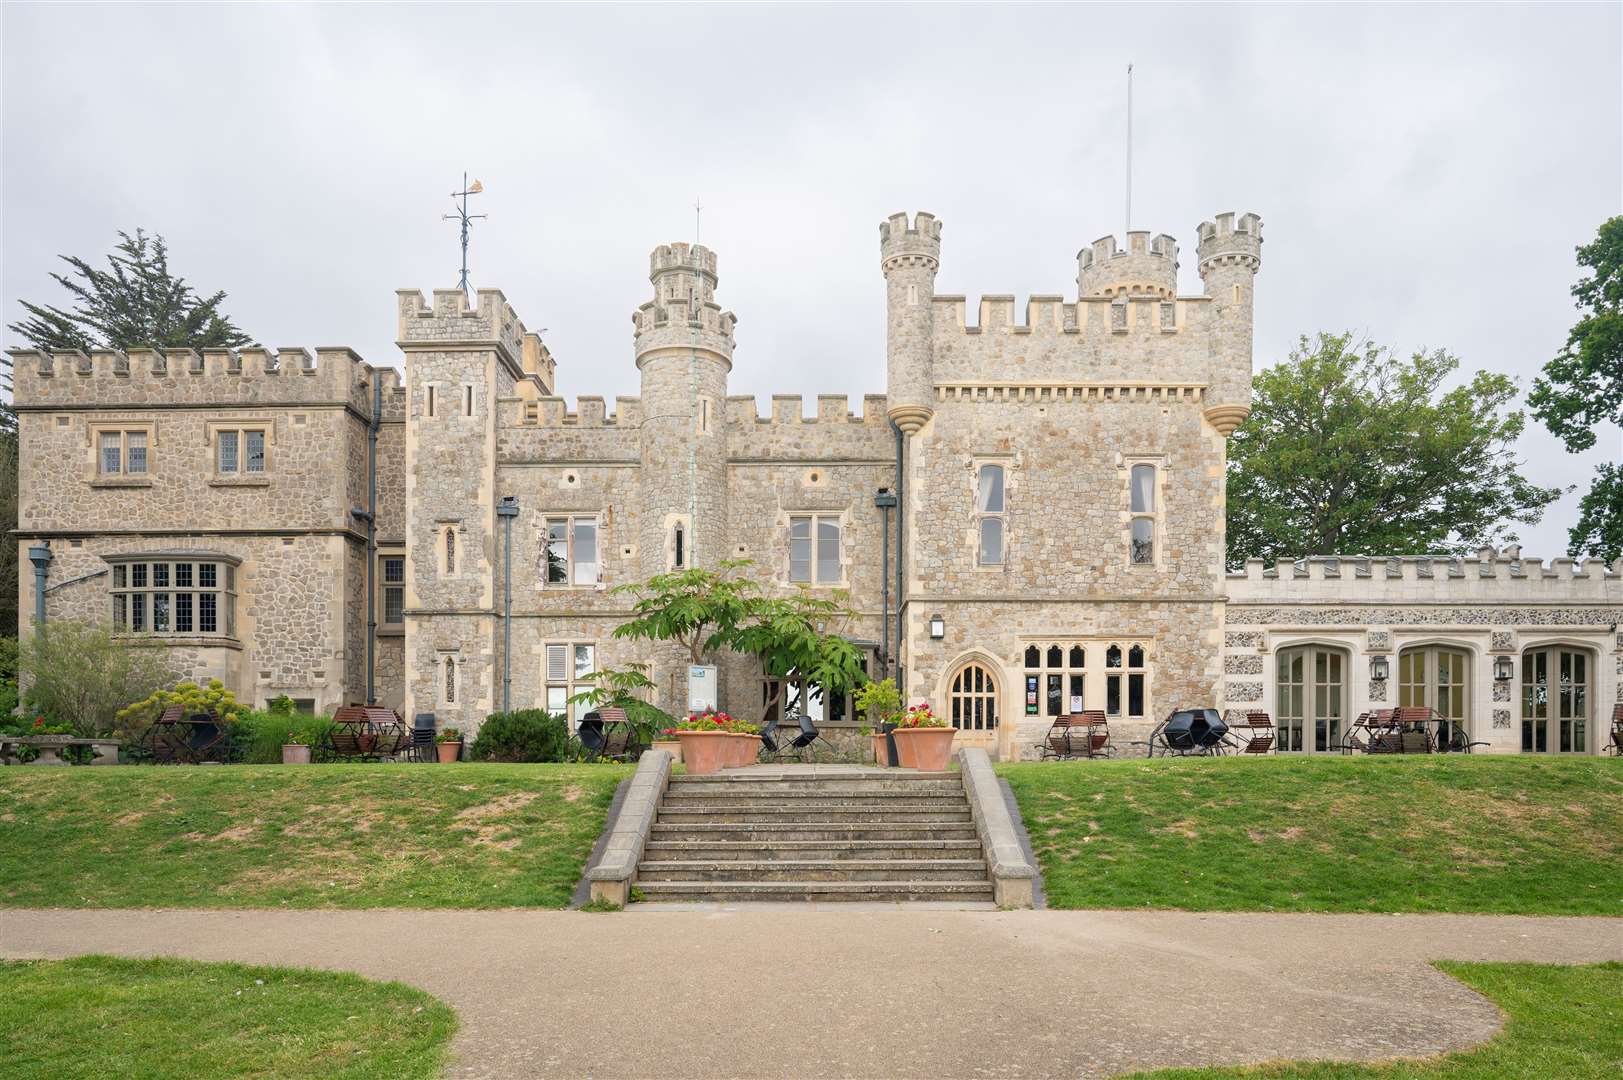 Whitstable Castle has asked the council to allow it to play music outside and serve alcoholic drinks until 10pm. Photo: Whitstable Castle Trust